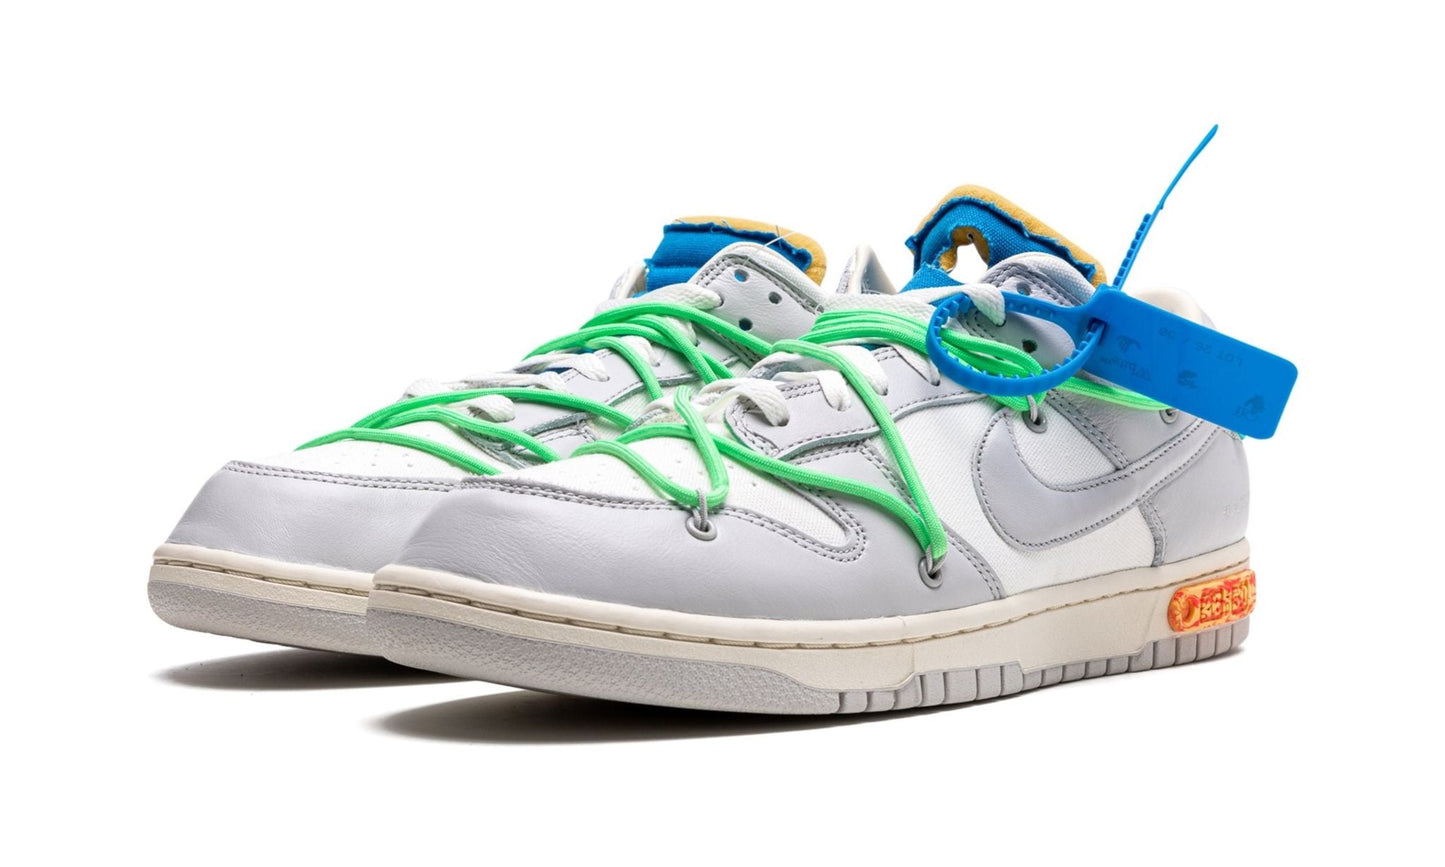 NIKE X OFF-WHITE DUNK LOW "Off-White - Lot 26"